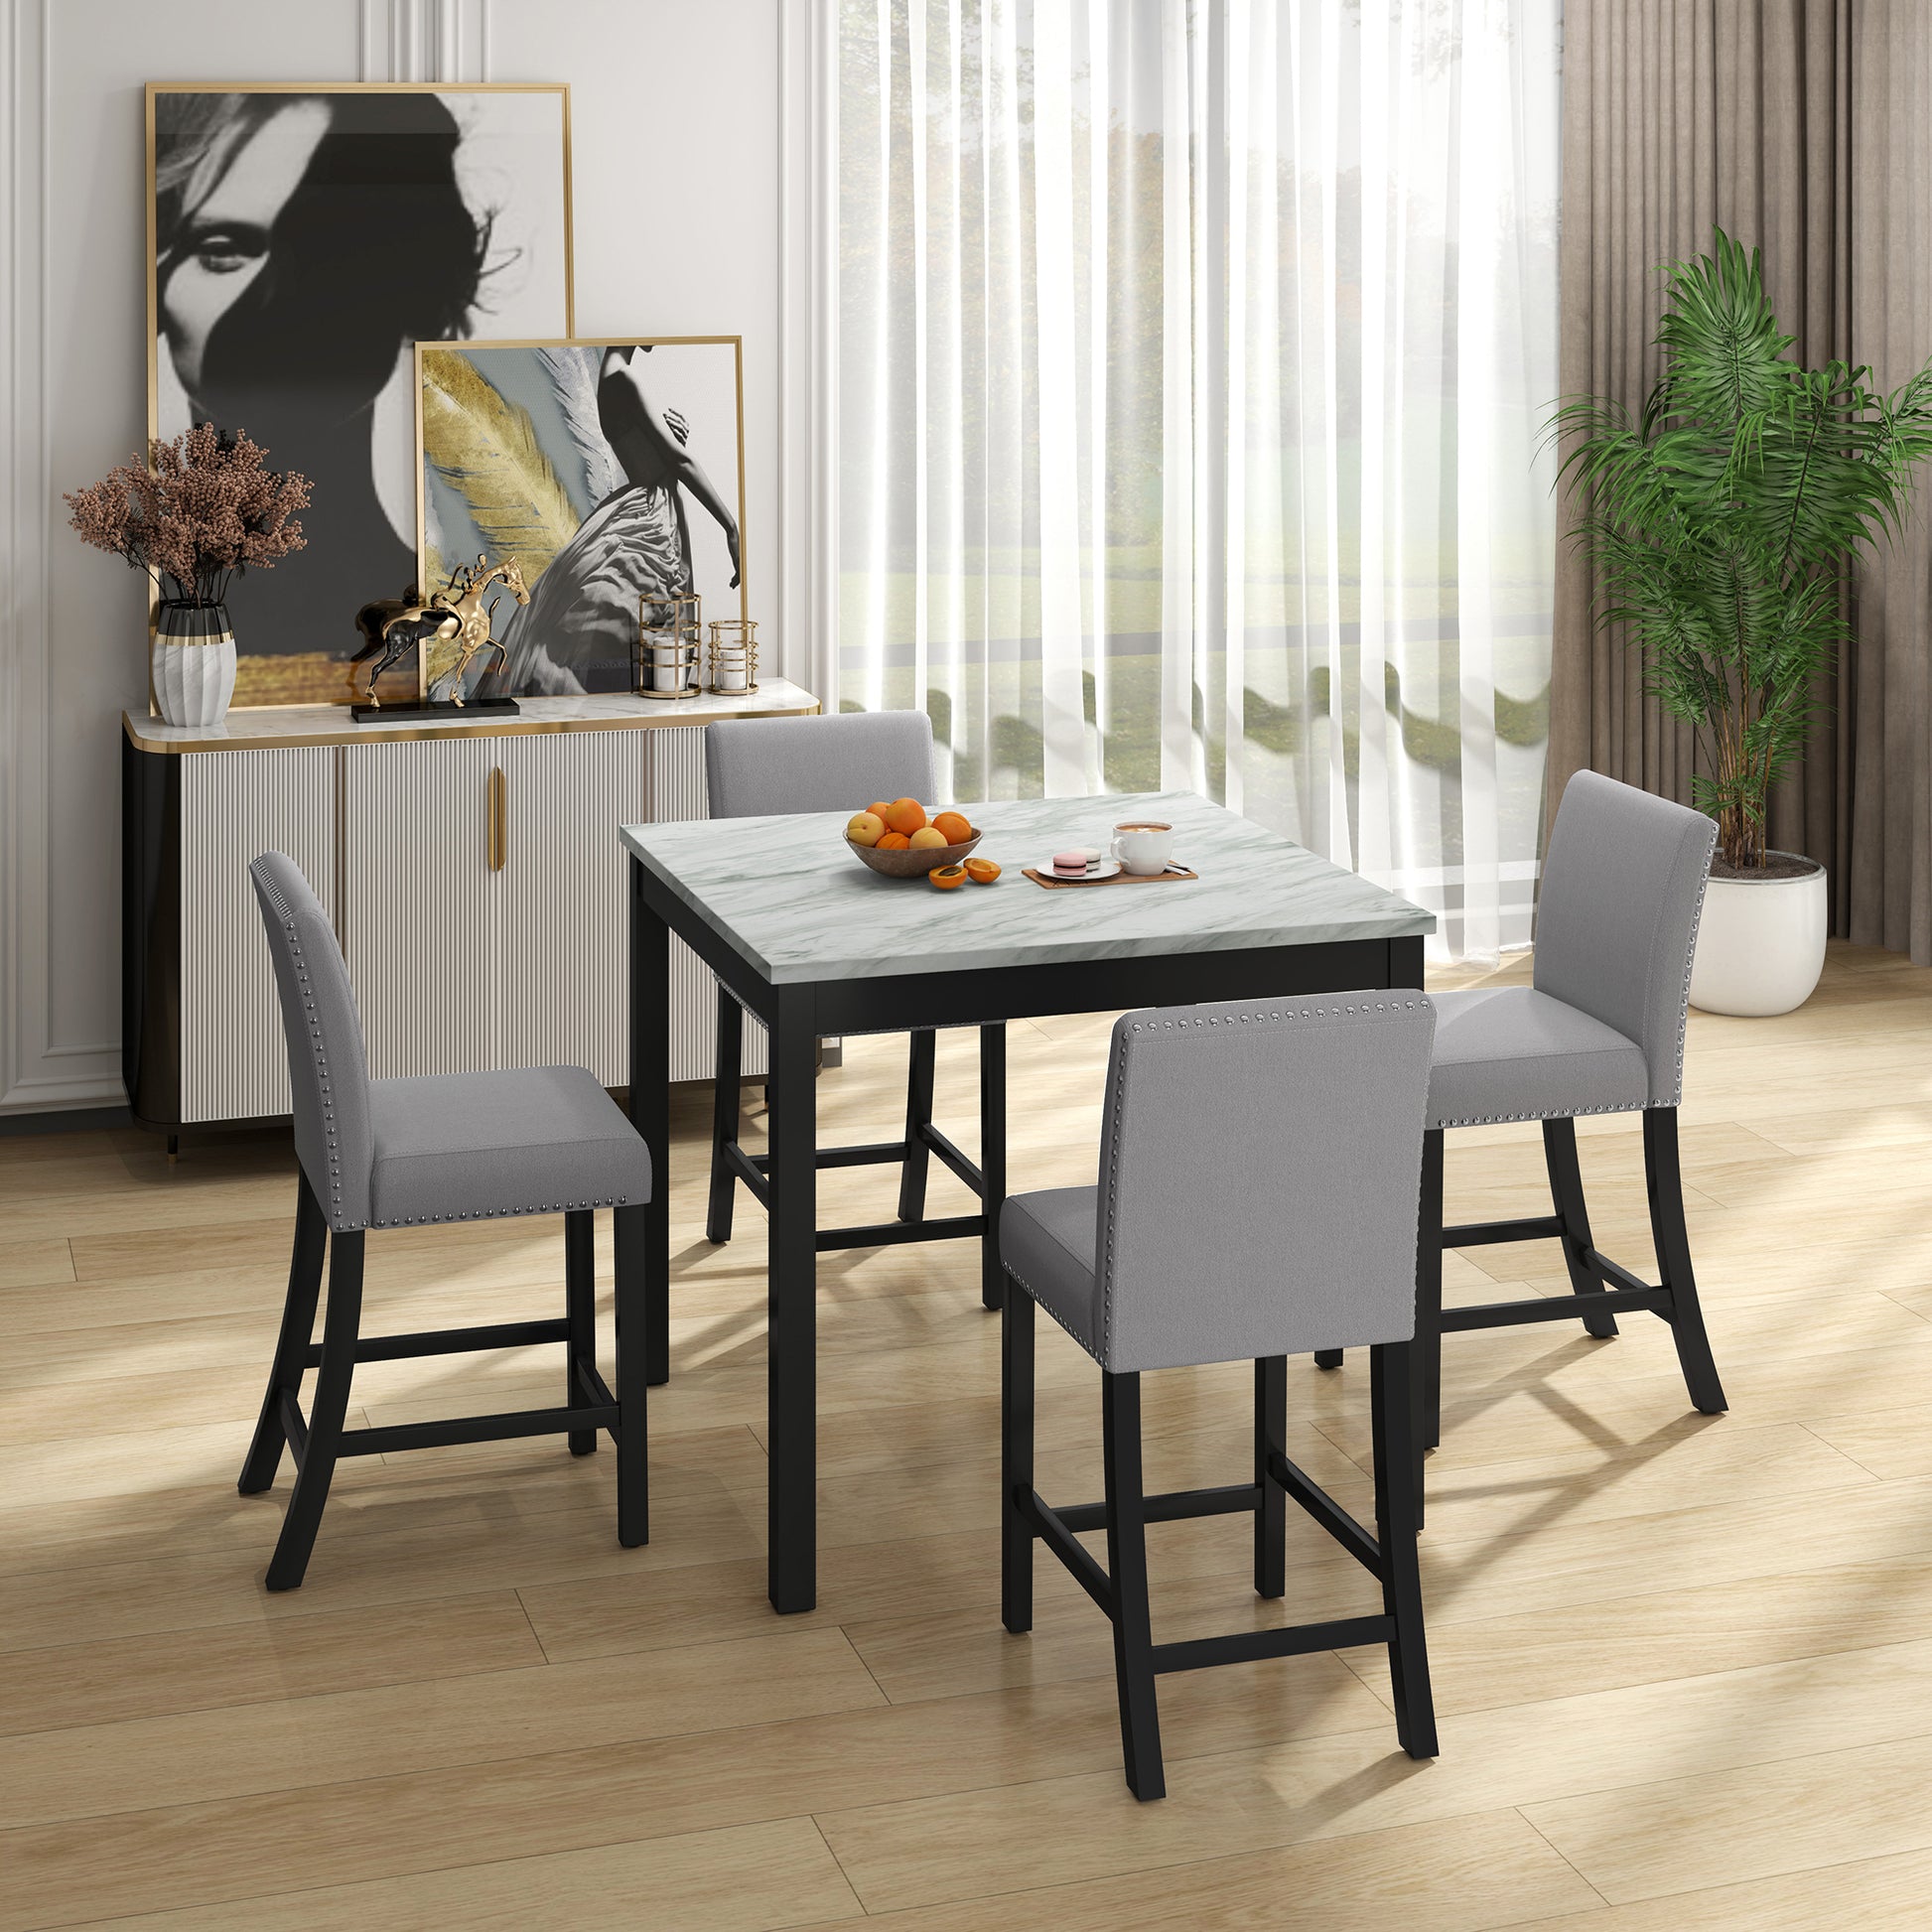 5 Piece Dining Table and Chair Set, Wooden Dining black+ gray-solid wood+mdf